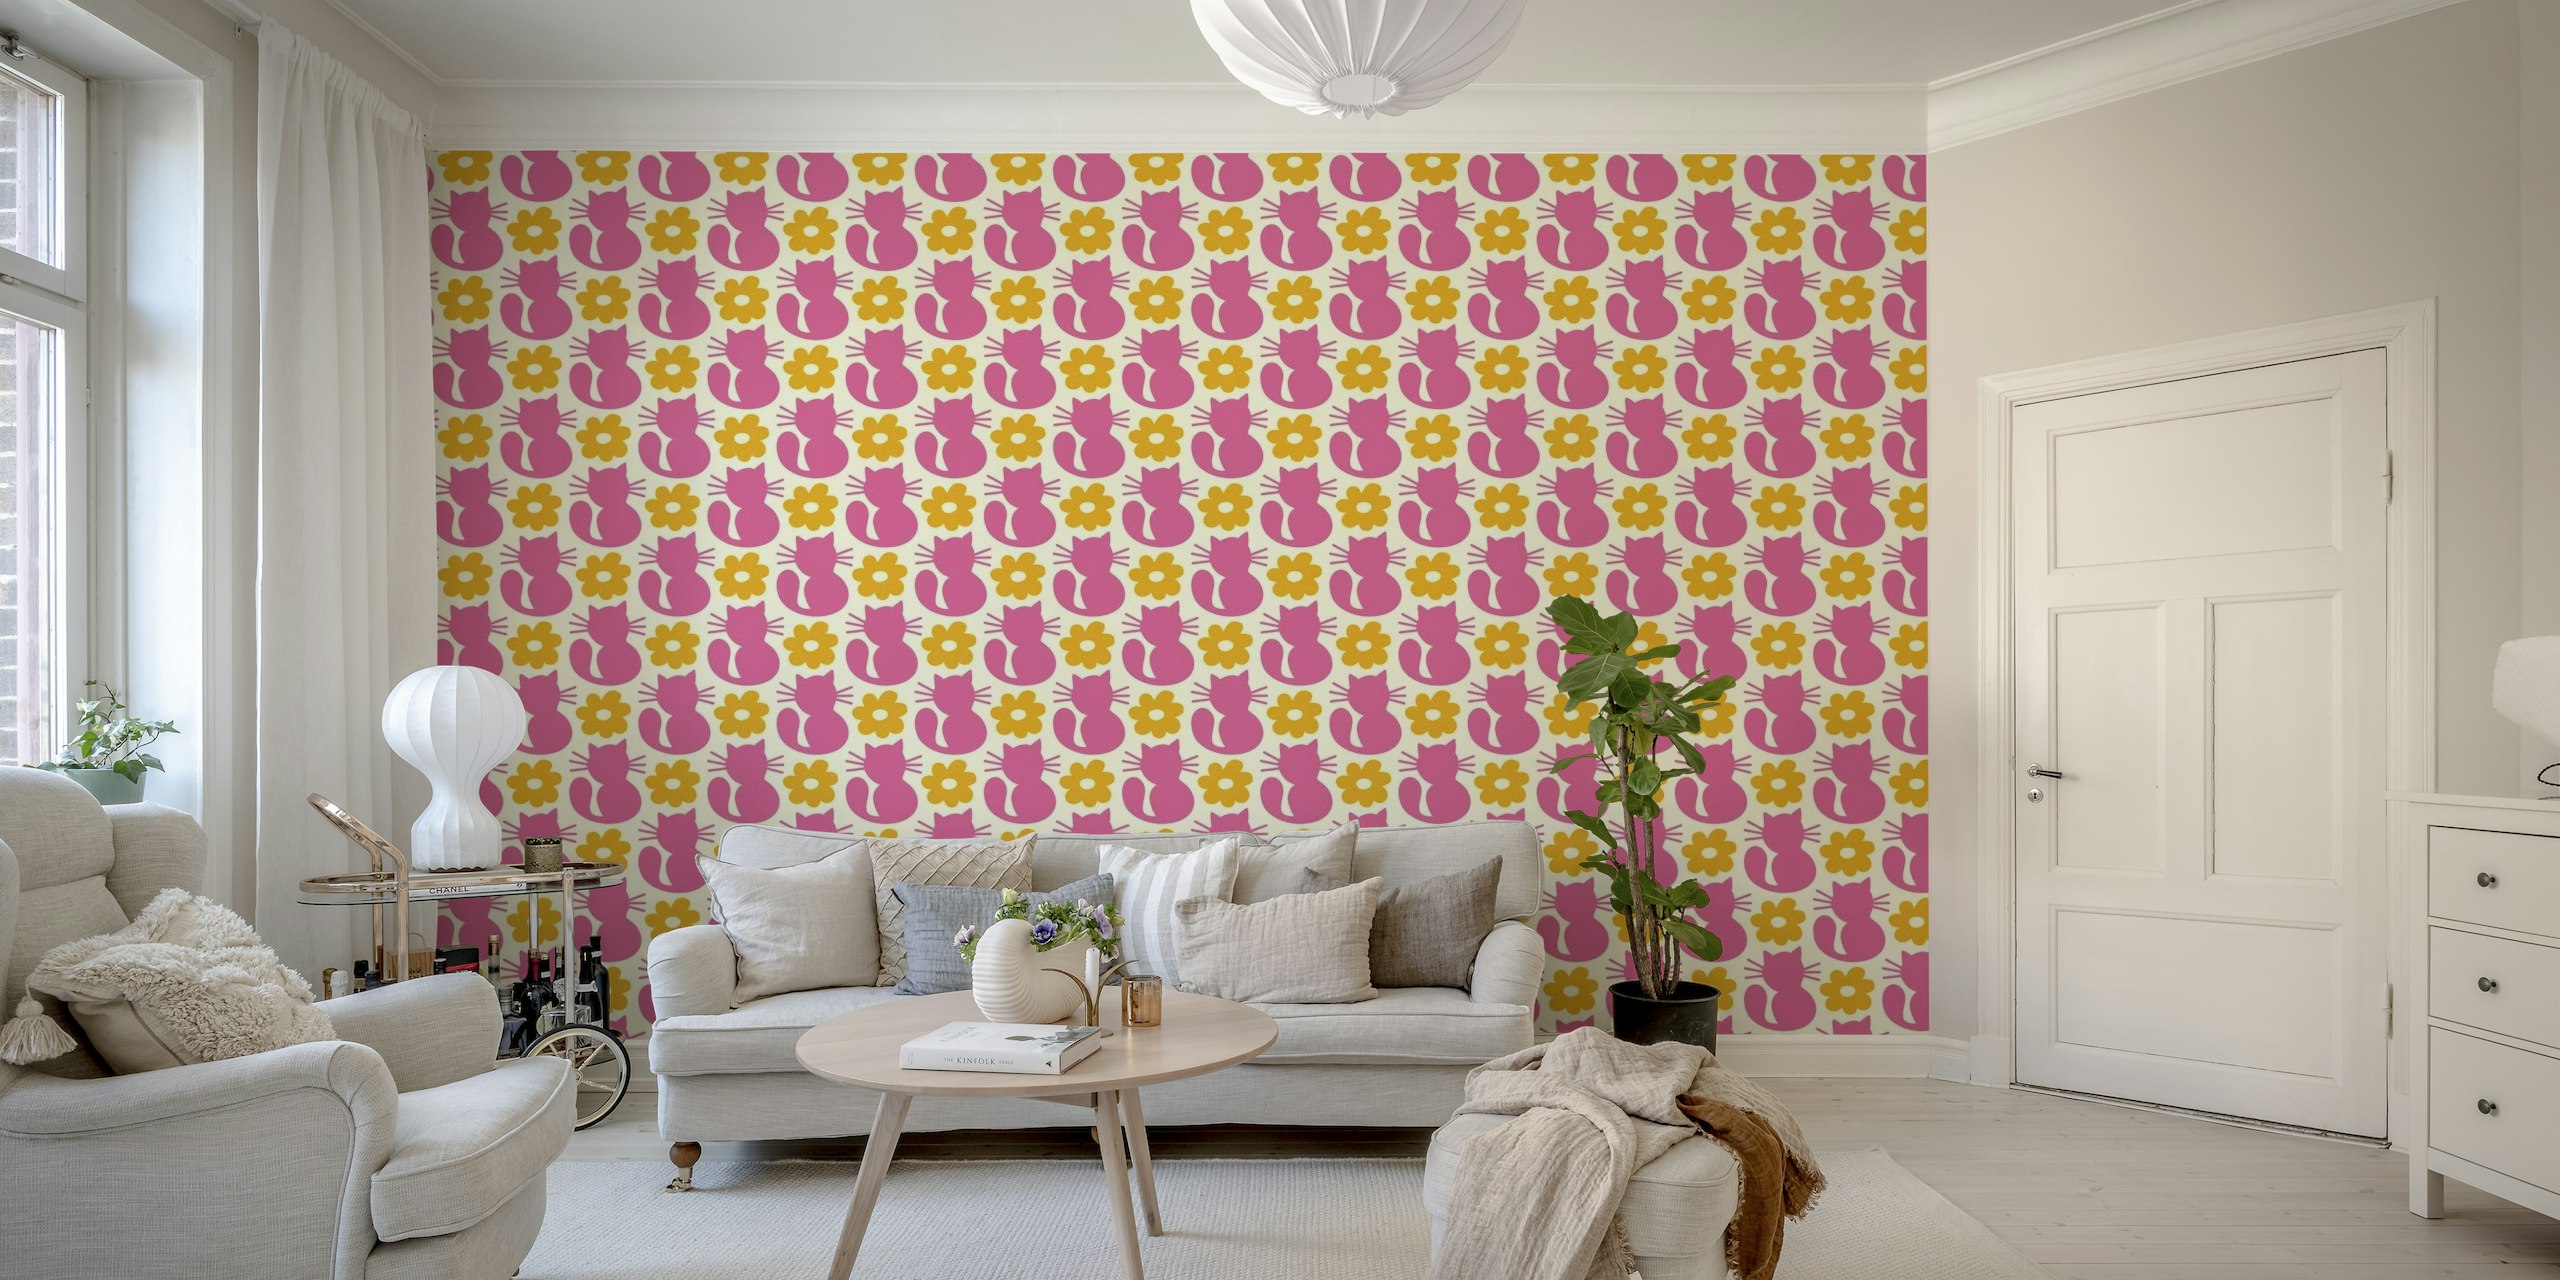 Illustration of playful retro-style cat silhouettes with yellow flowers on a pink background wall mural